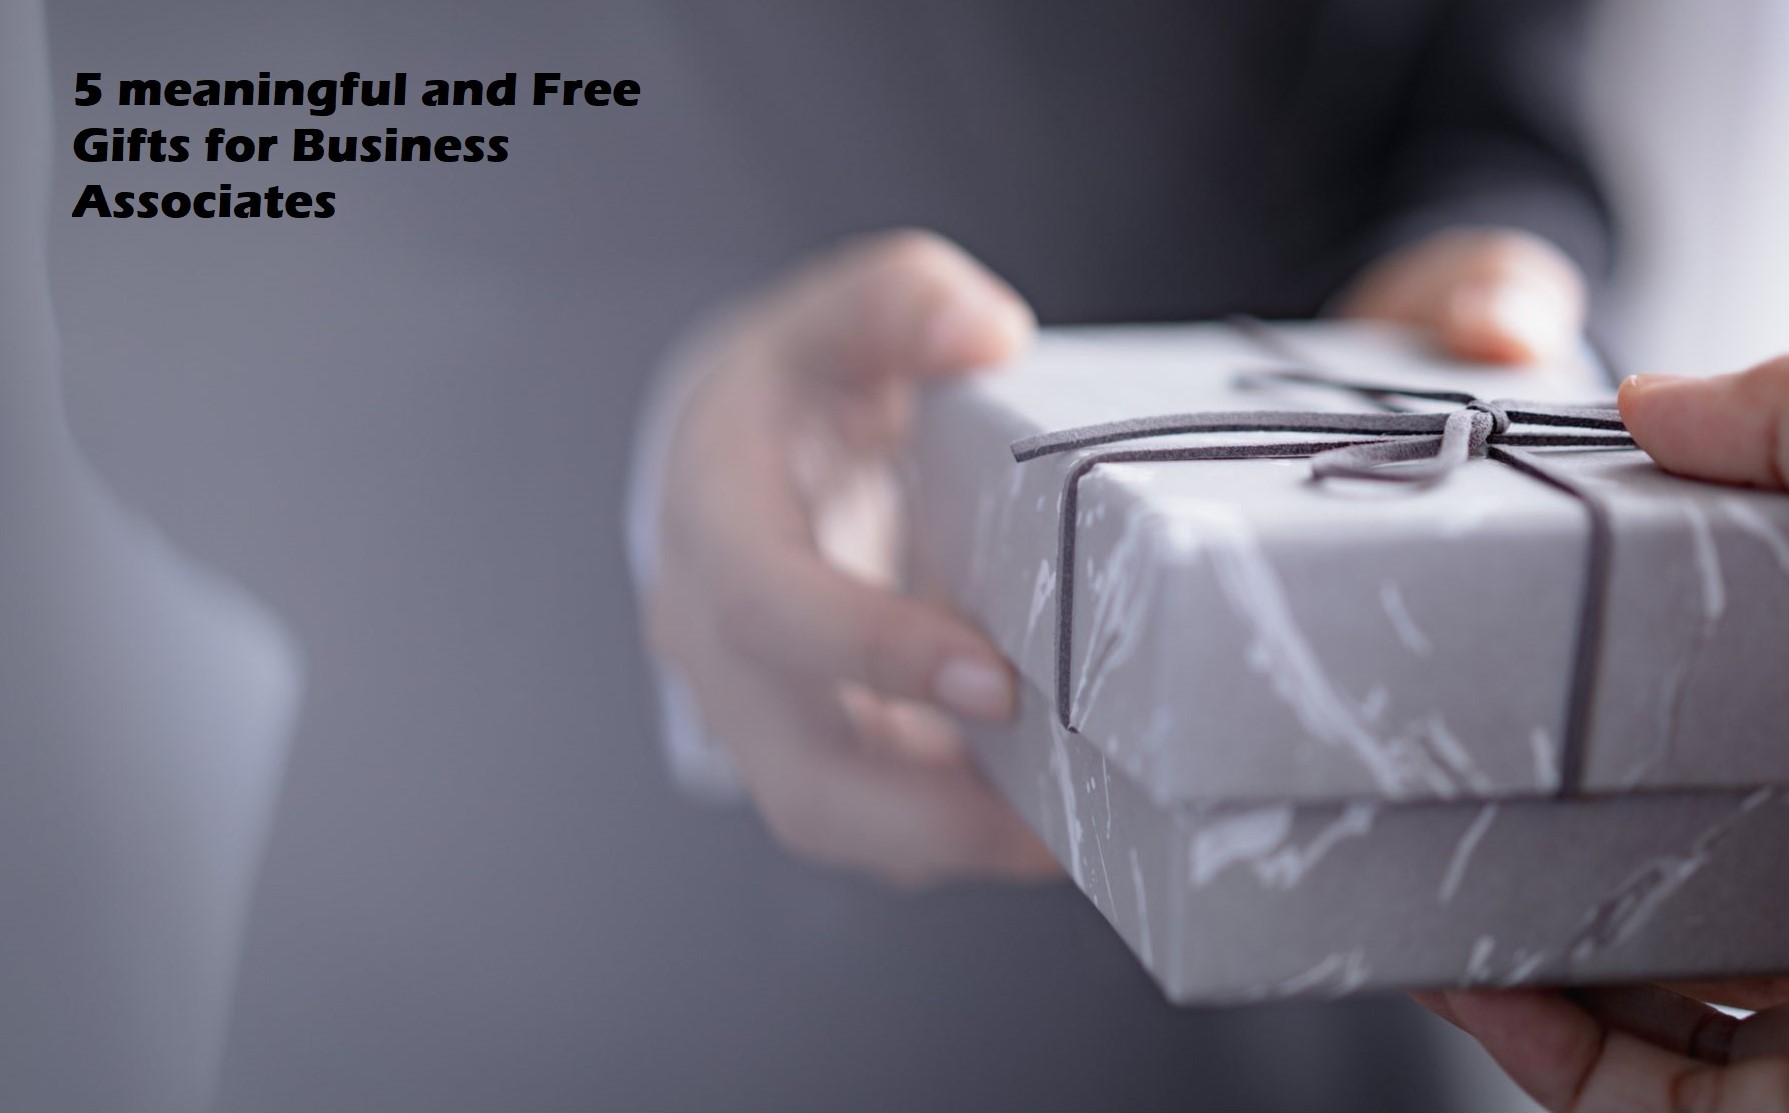 5 meaningful and Free Gifts for Business Associates